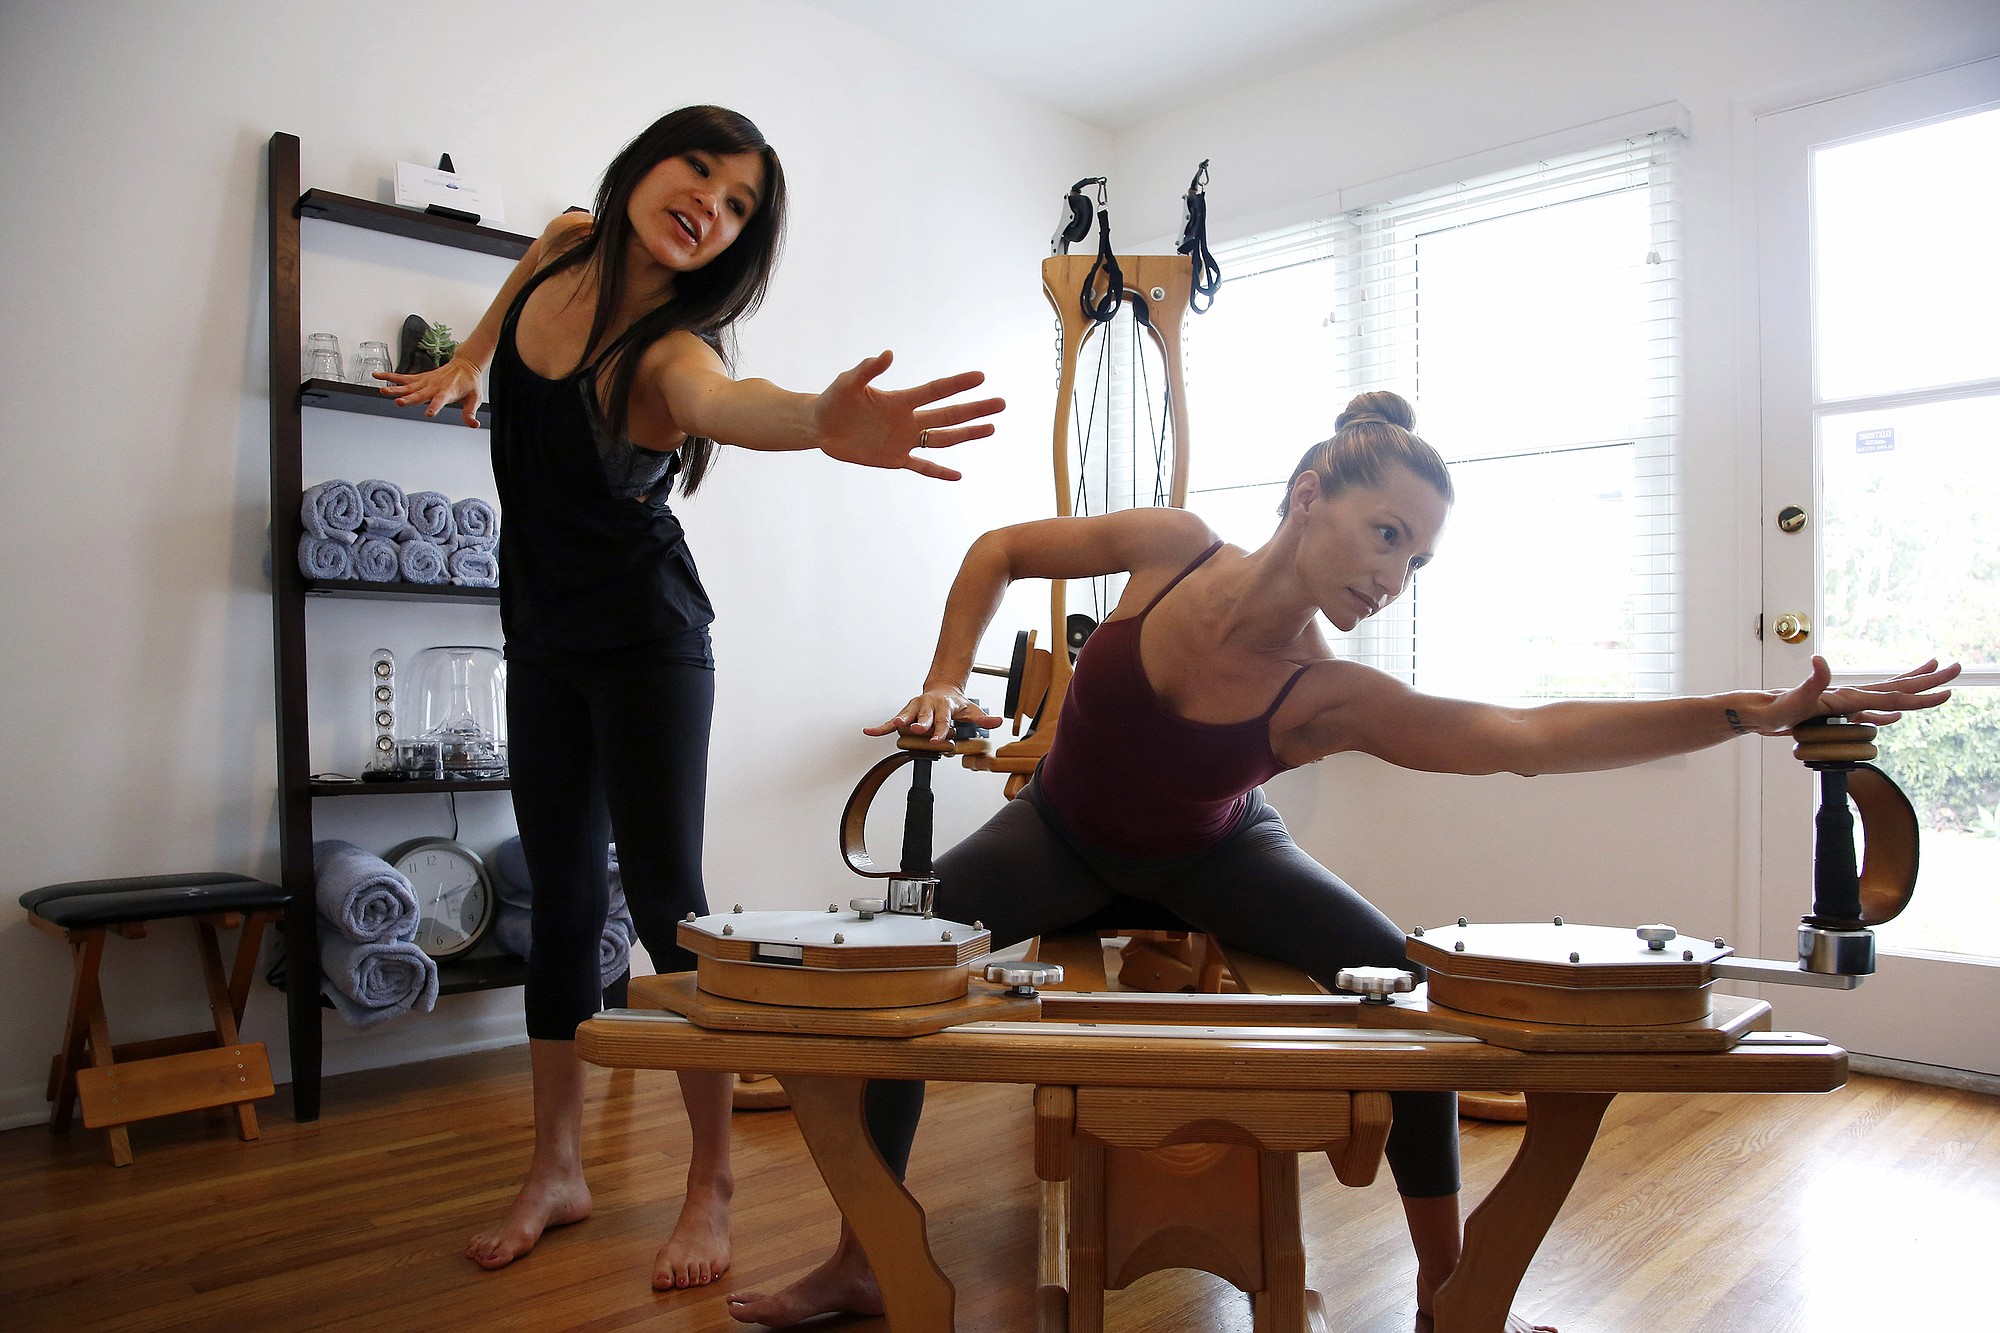 Deandra Lee, left, demonstrates the movement client Danielle Thulin should be doing on the Gyrotonic Tower Machine in Los Angeles.